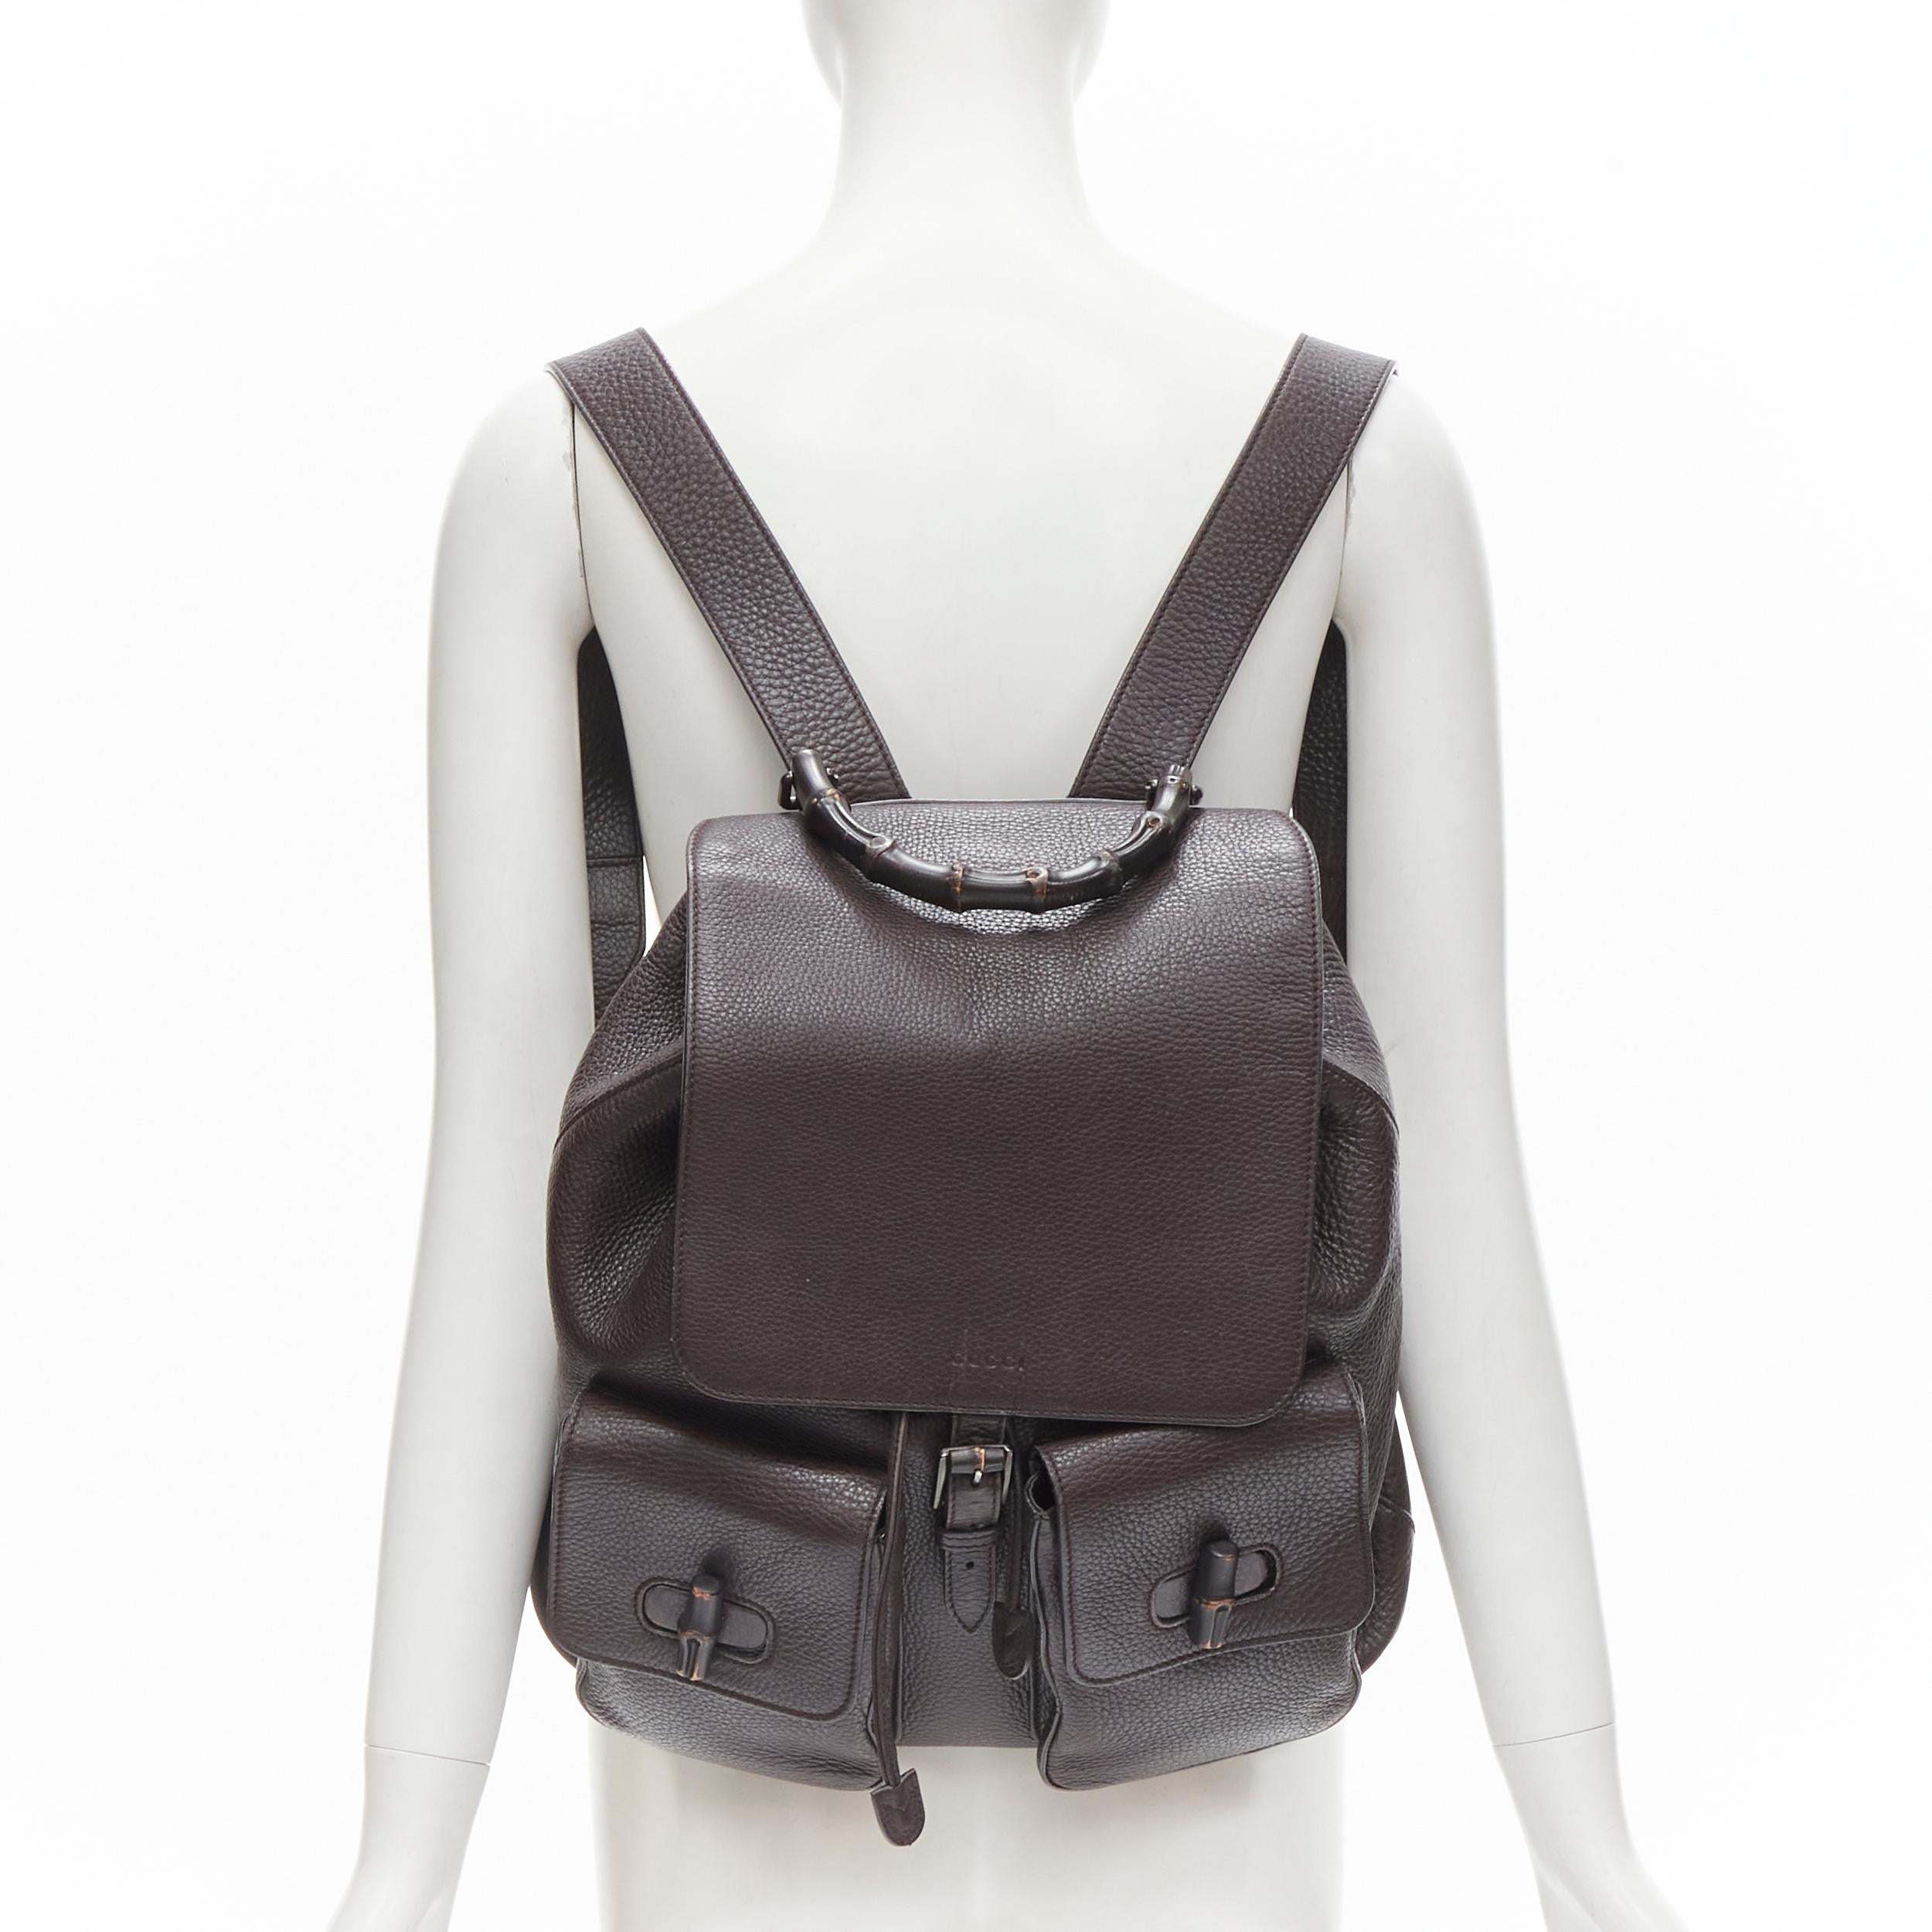 GUCCI dark brown pebble leather Bamboo turnlock pocket flap backpack bag 
Reference: JACG/A00006 
Brand: Gucci 
Model: 387097 001998 
Collection: Bamboo 
Material: Leather 
Color: Brown 
Pattern: Solid 
Closure: Turnlock 
Extra Detail: Dark brown